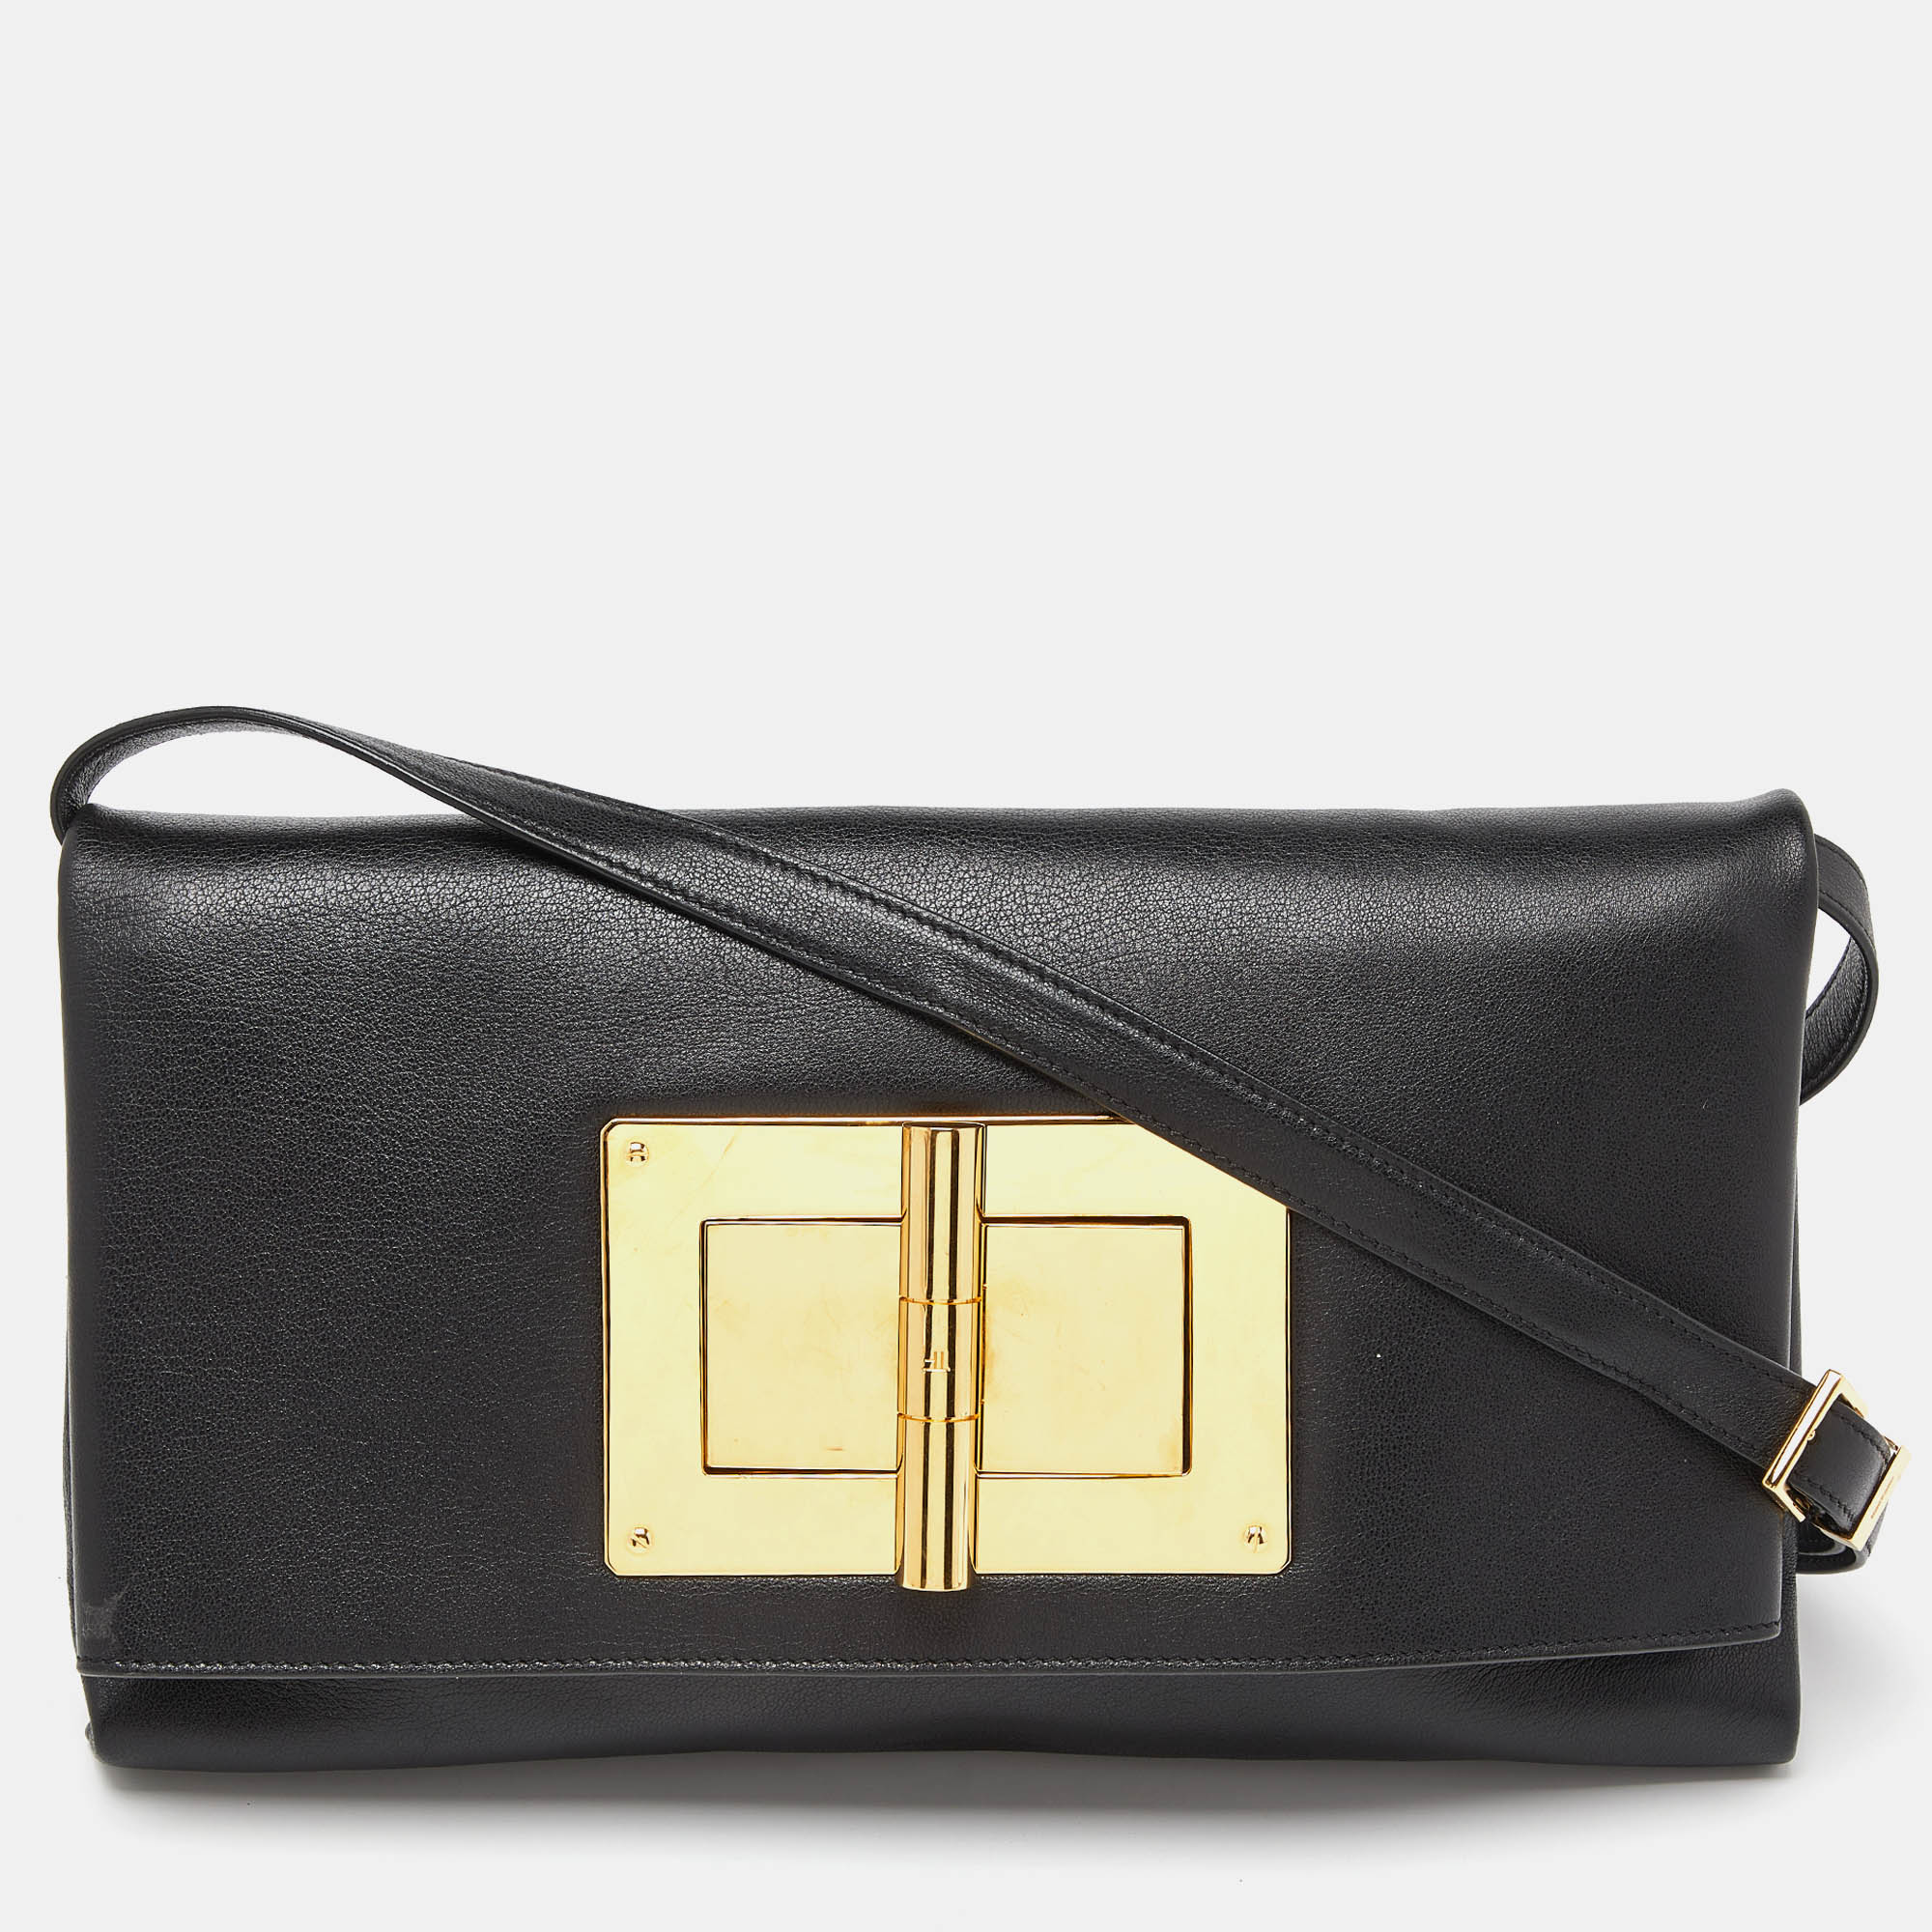 Pre-owned Tom Ford Black Leather Natalia Convertible Clutch